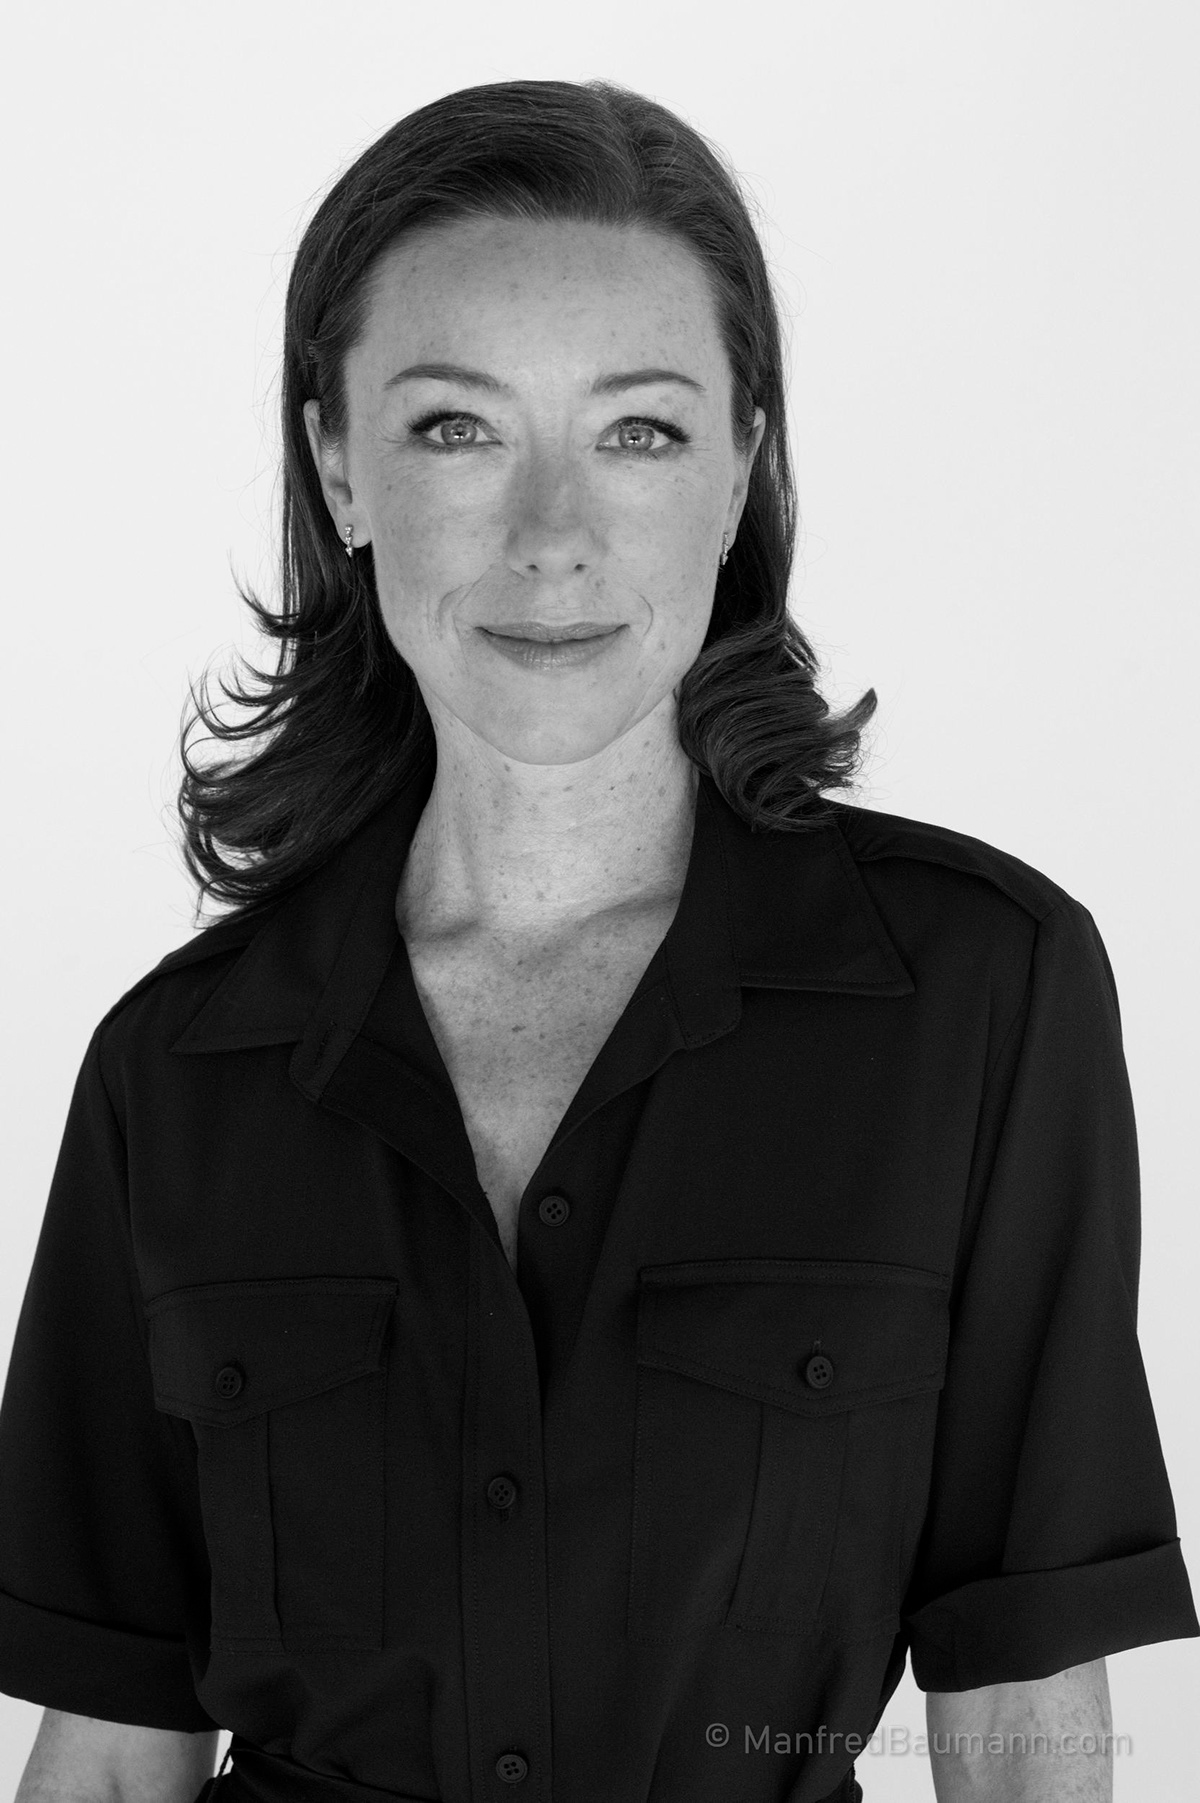 actress house of cards Manfred Baumann molly parker photographer photoshoot portrait